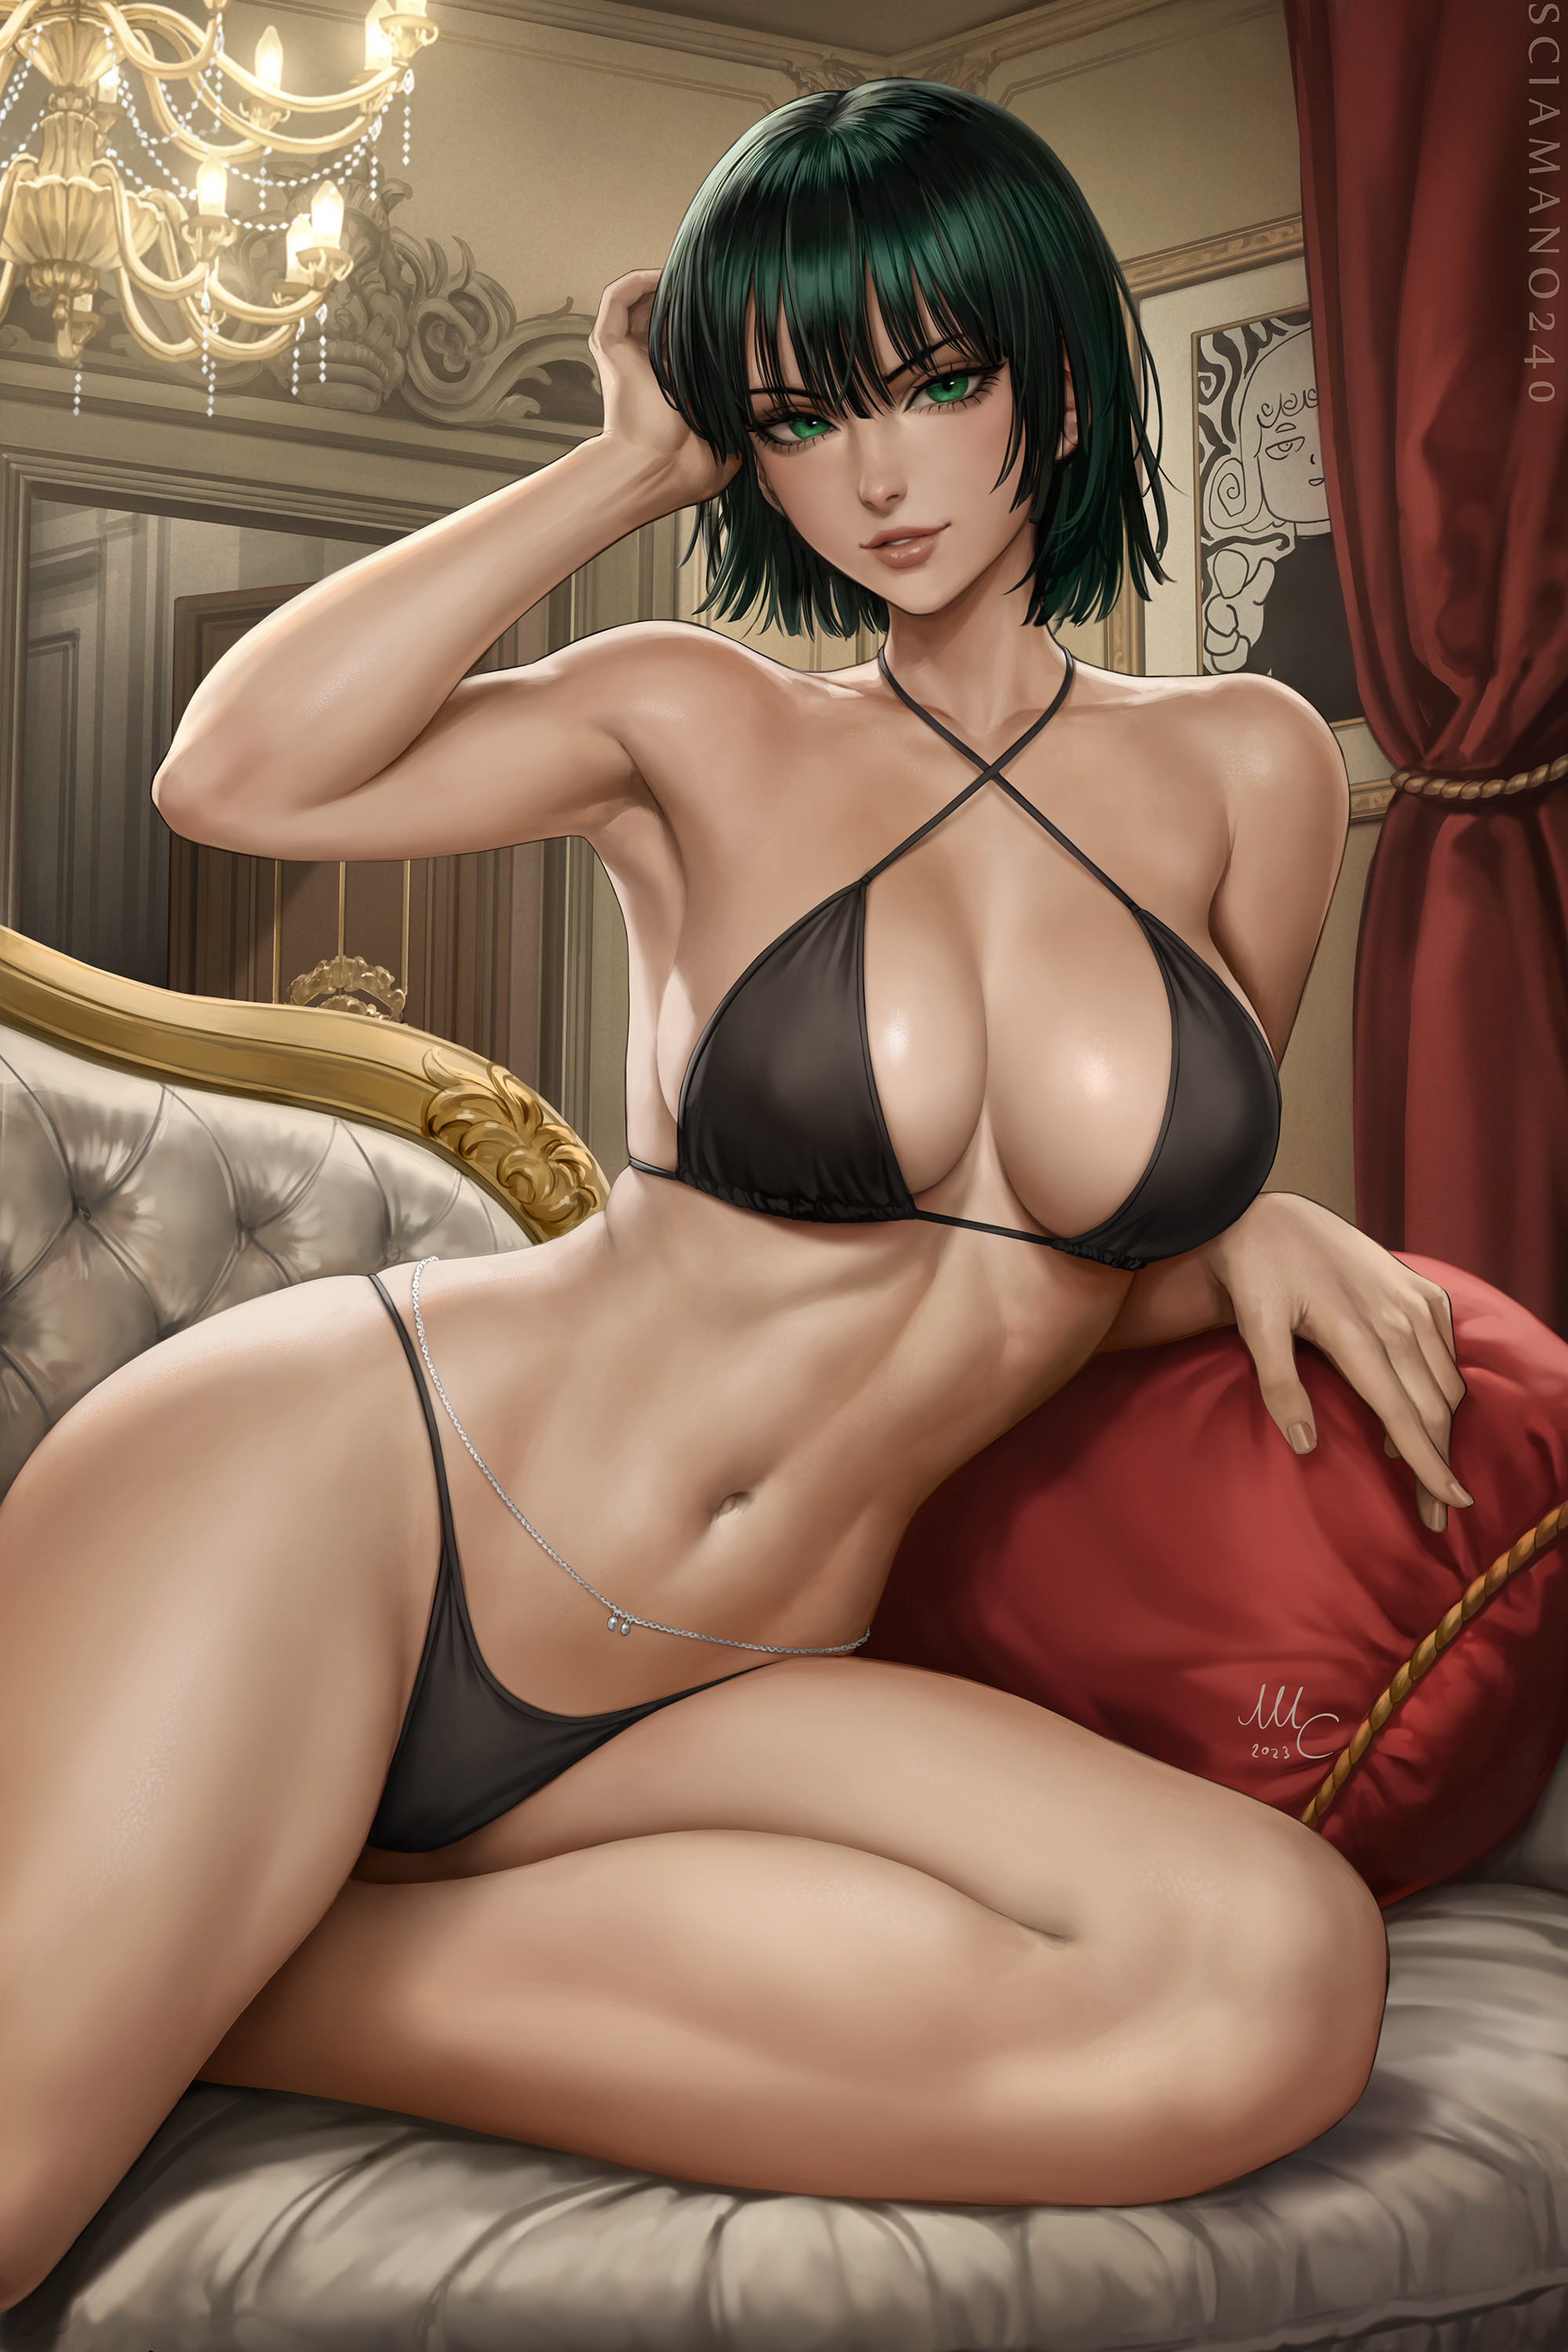 Anime 2000x3000 illustration artwork digital art fan art drawing anime anime girls Mirco Cabbia bikini belly belly button looking at viewer cleavage One-Punch Man Fubuki short hair green hair green eyes black clothing pillow couch chandeliers boobs portrait display armpits